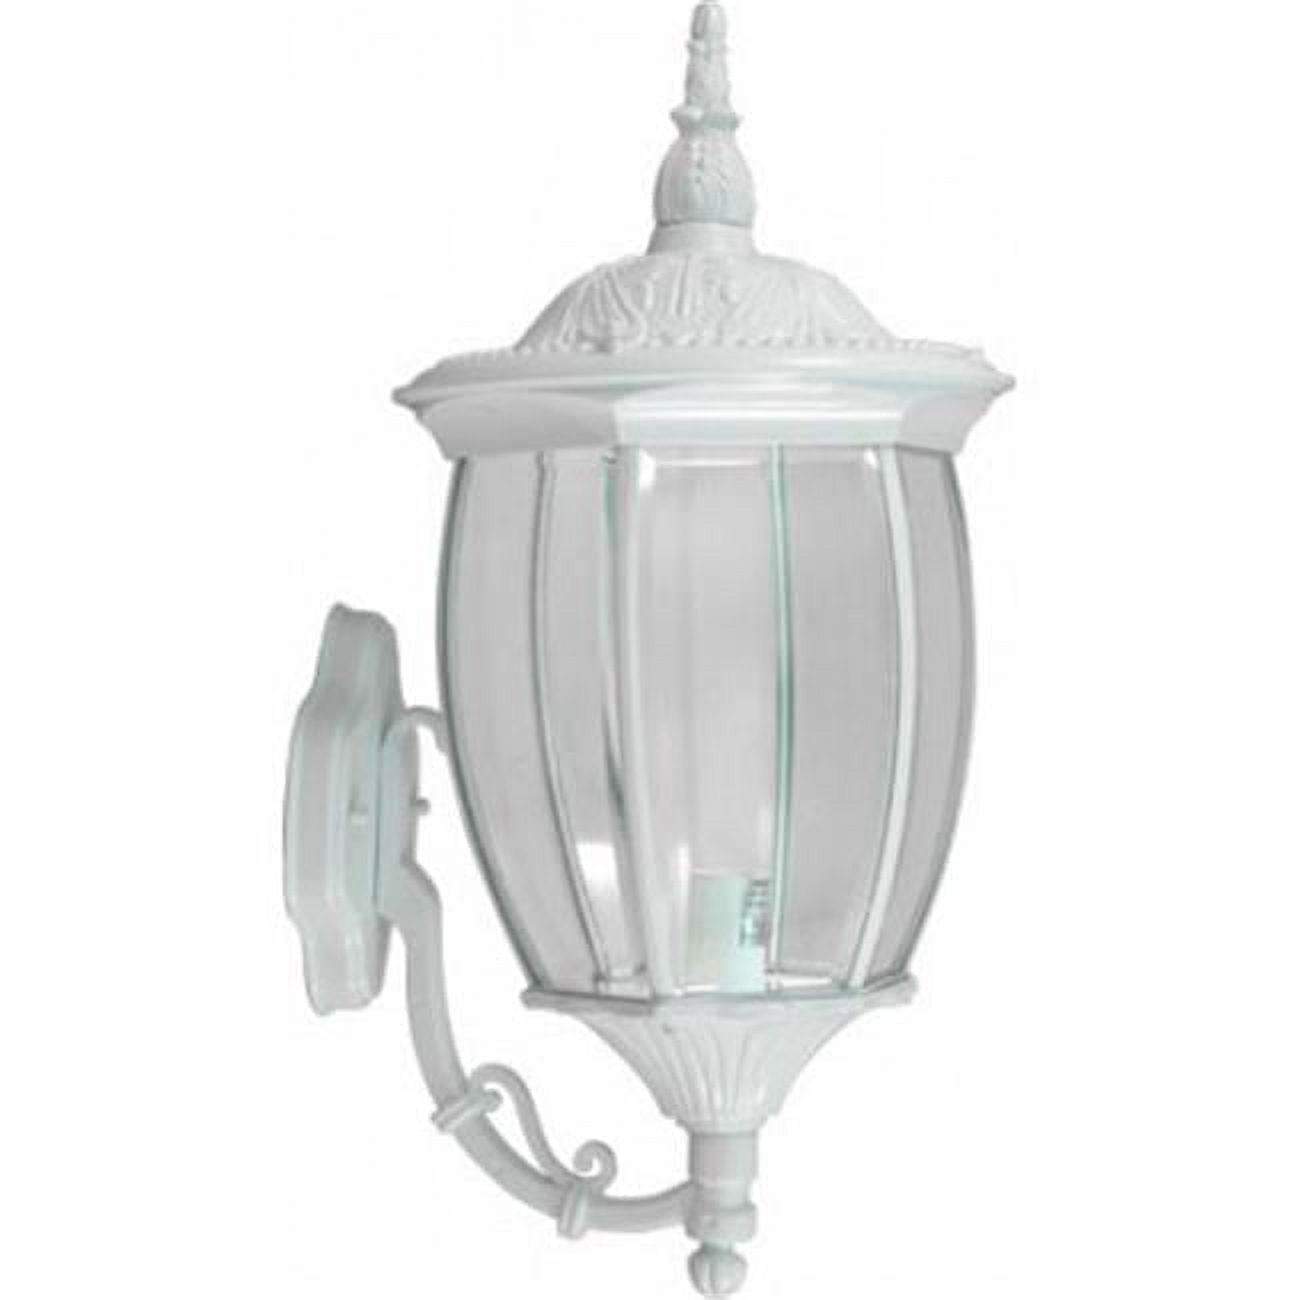 Picture of Dabmar Lighting GM105-26-W 26W & 120V S26-GU24 Victoria Wall Light Fixture - White